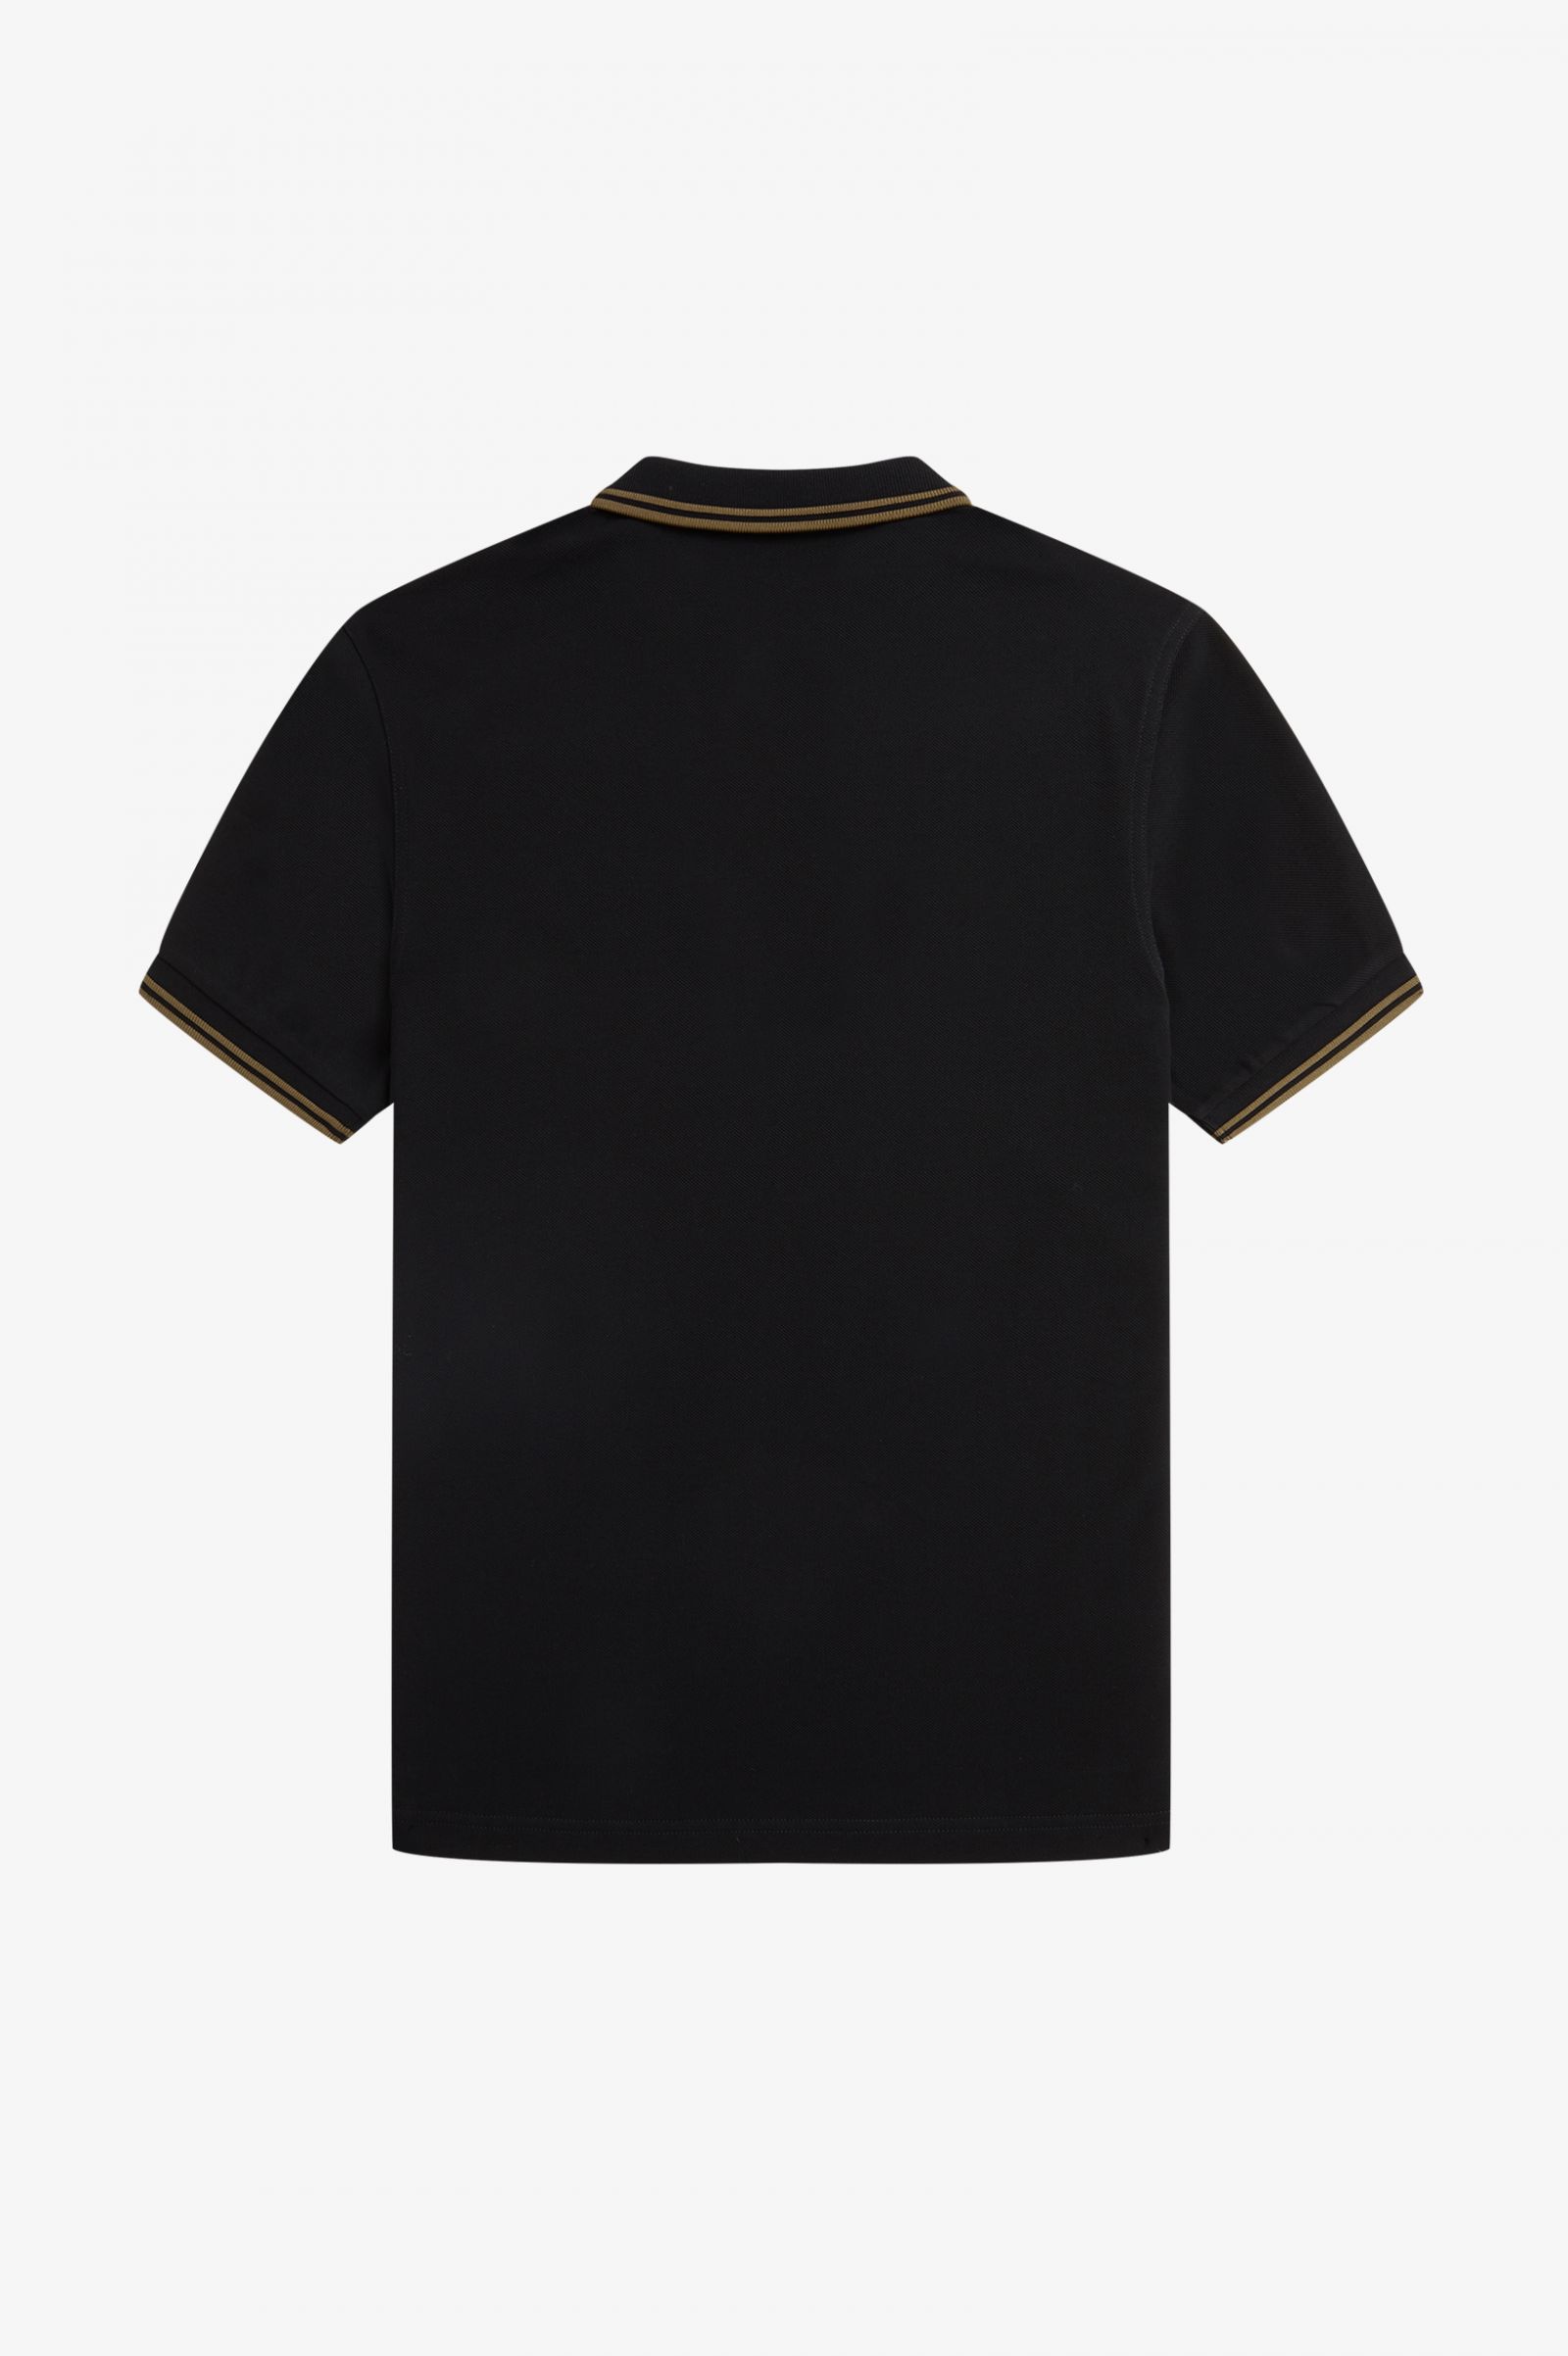 Fred Perry Twin Tipped Herren Polo Shirt in Schwarz/Shaded